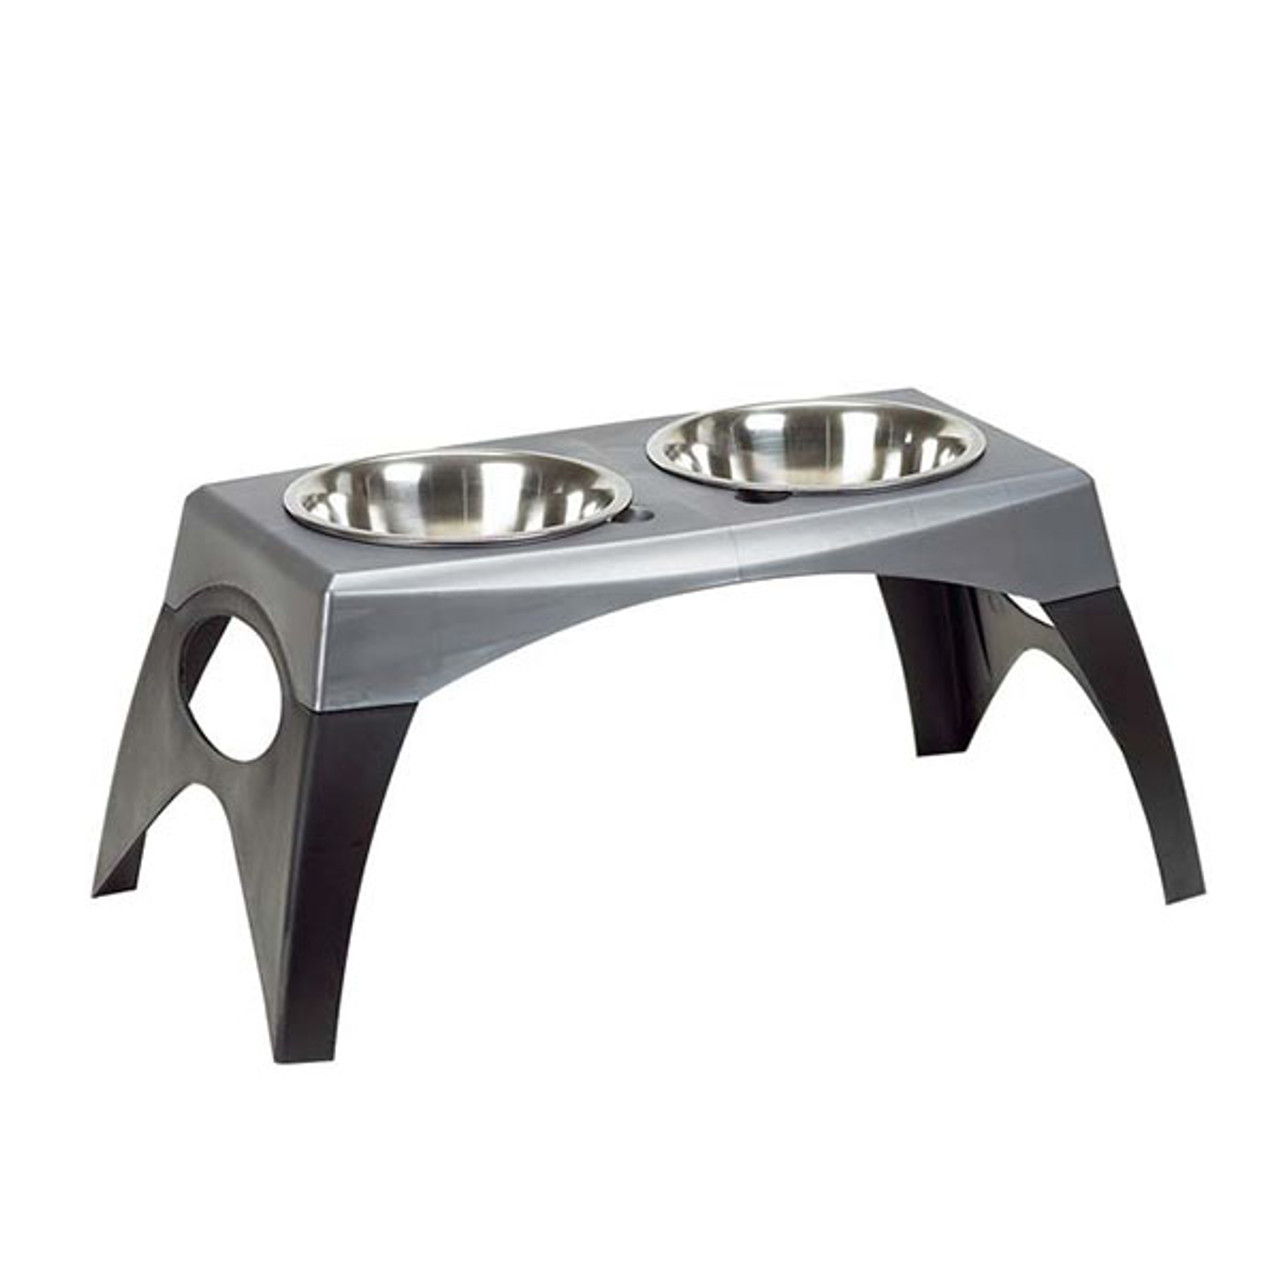 Elevated Pet Feeder that includes stainless steel bowls - available at OKIE DOG SUPPLY!